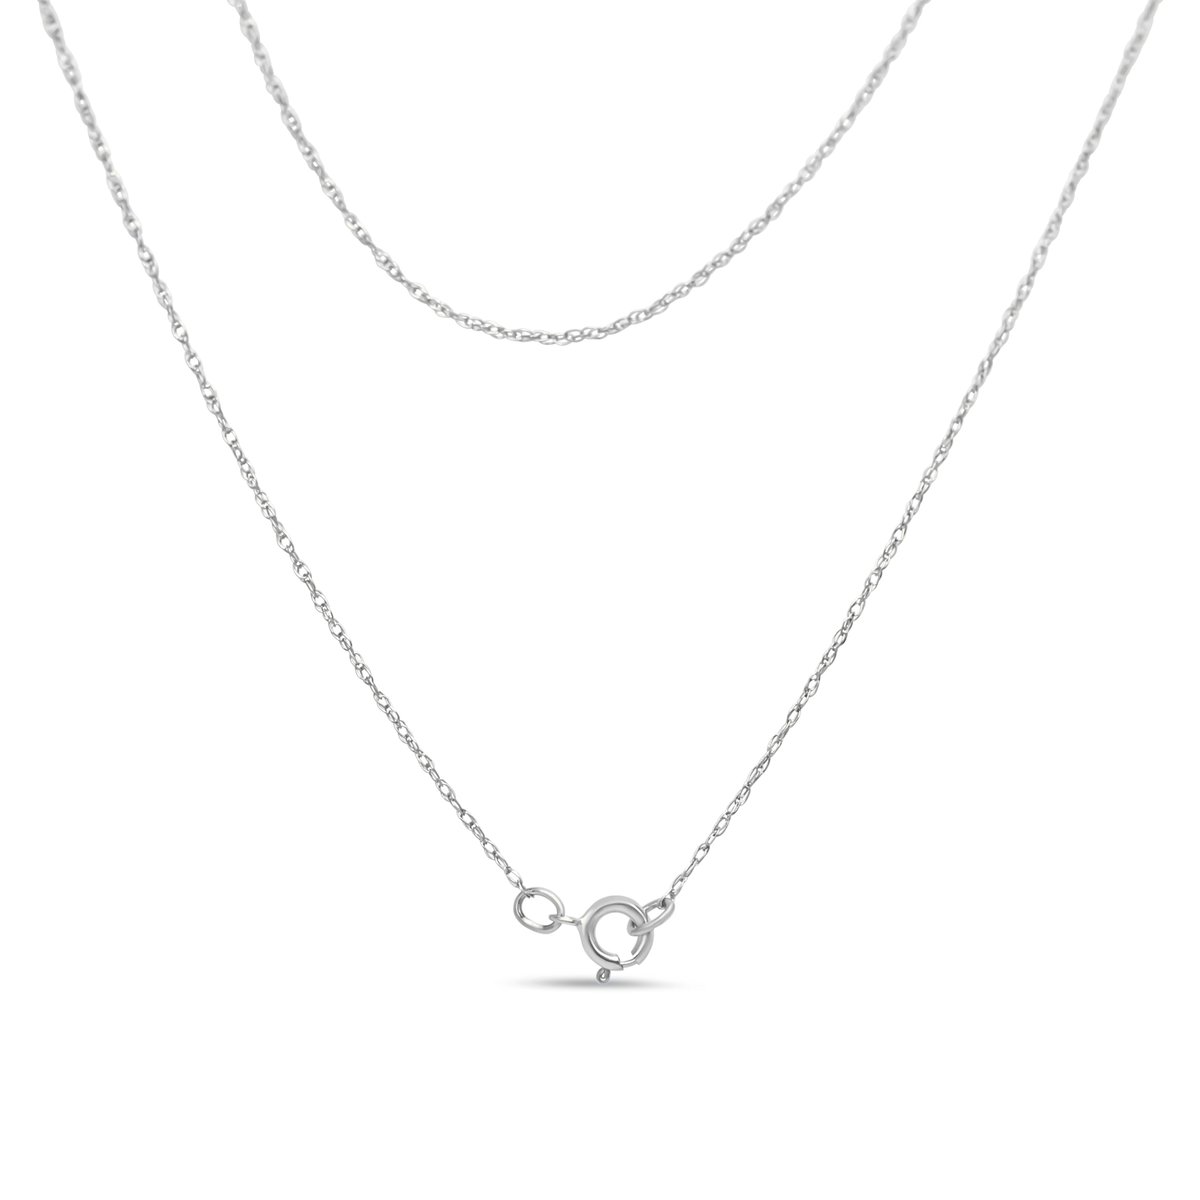 Haus Of Brilliance .925 Sterling Silver 1/4 Cttw Diamond Lock 16 Pendant  Necklace with Paperclip Chain (H-I Color, SI2-I1 Clarity) 020384PWDM -  Ladies Jewelry, Diamond Lock Pendant Necklace - Jomashop